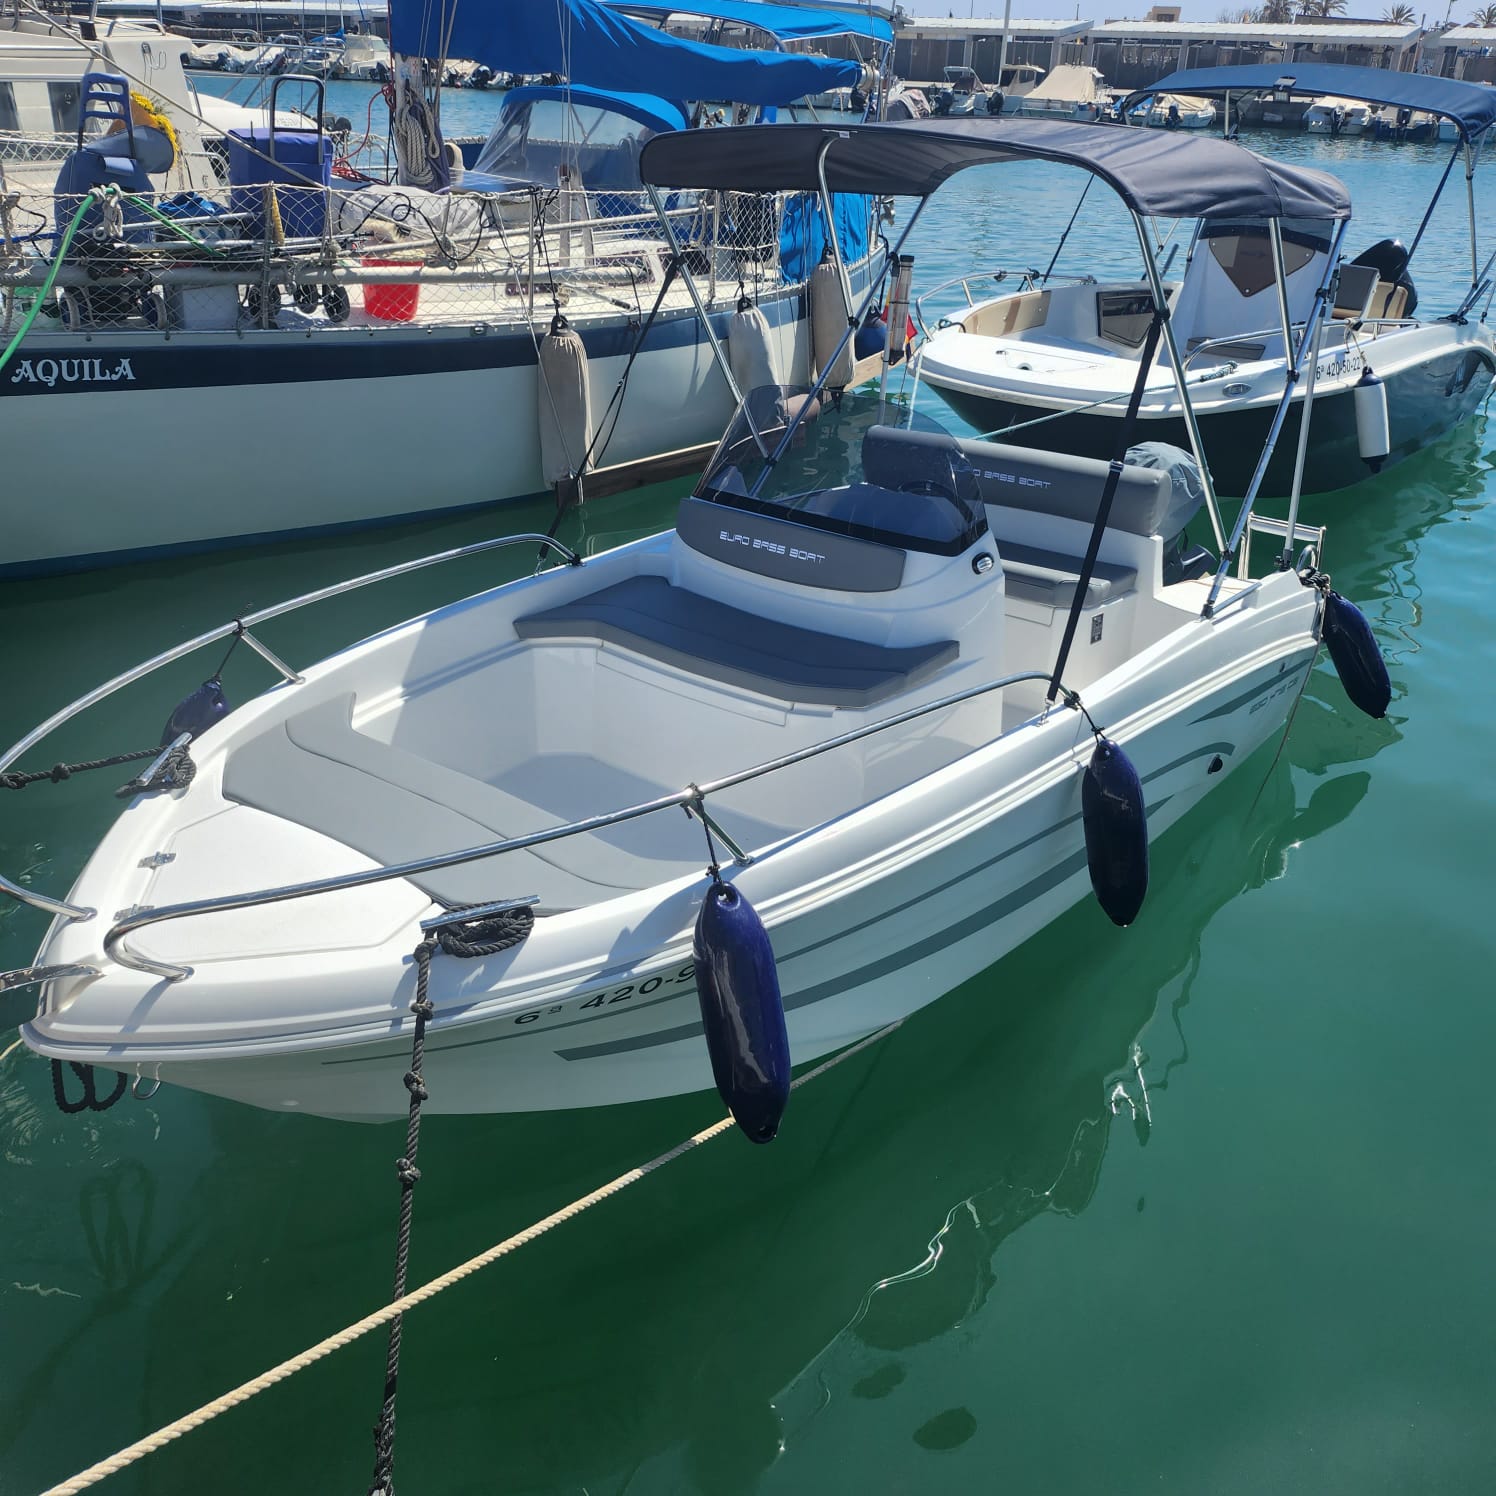 Boat Rental without license in Fuengirola